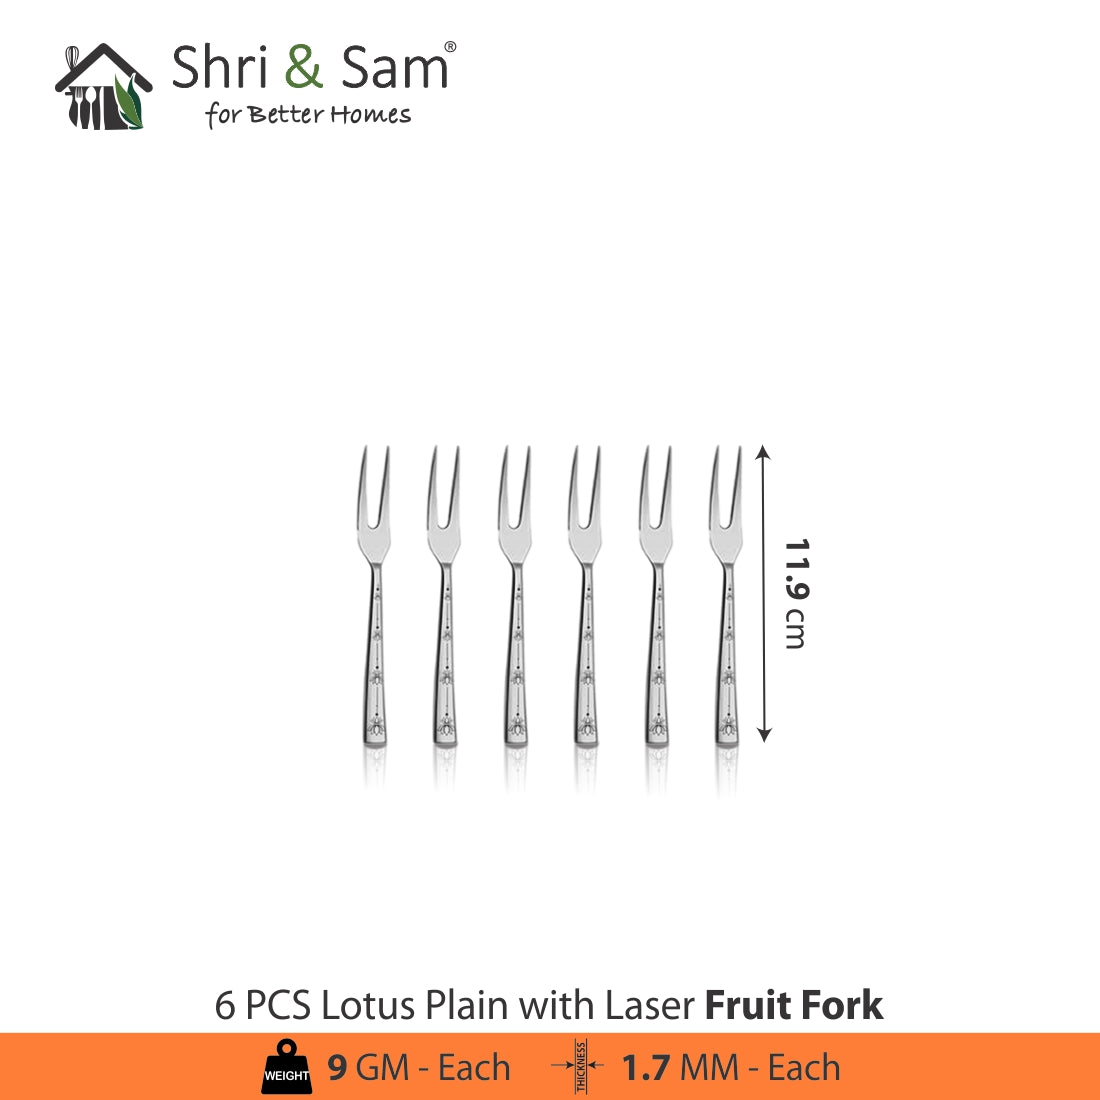 Stainless Steel Cutlery with Laser Lotus Plain